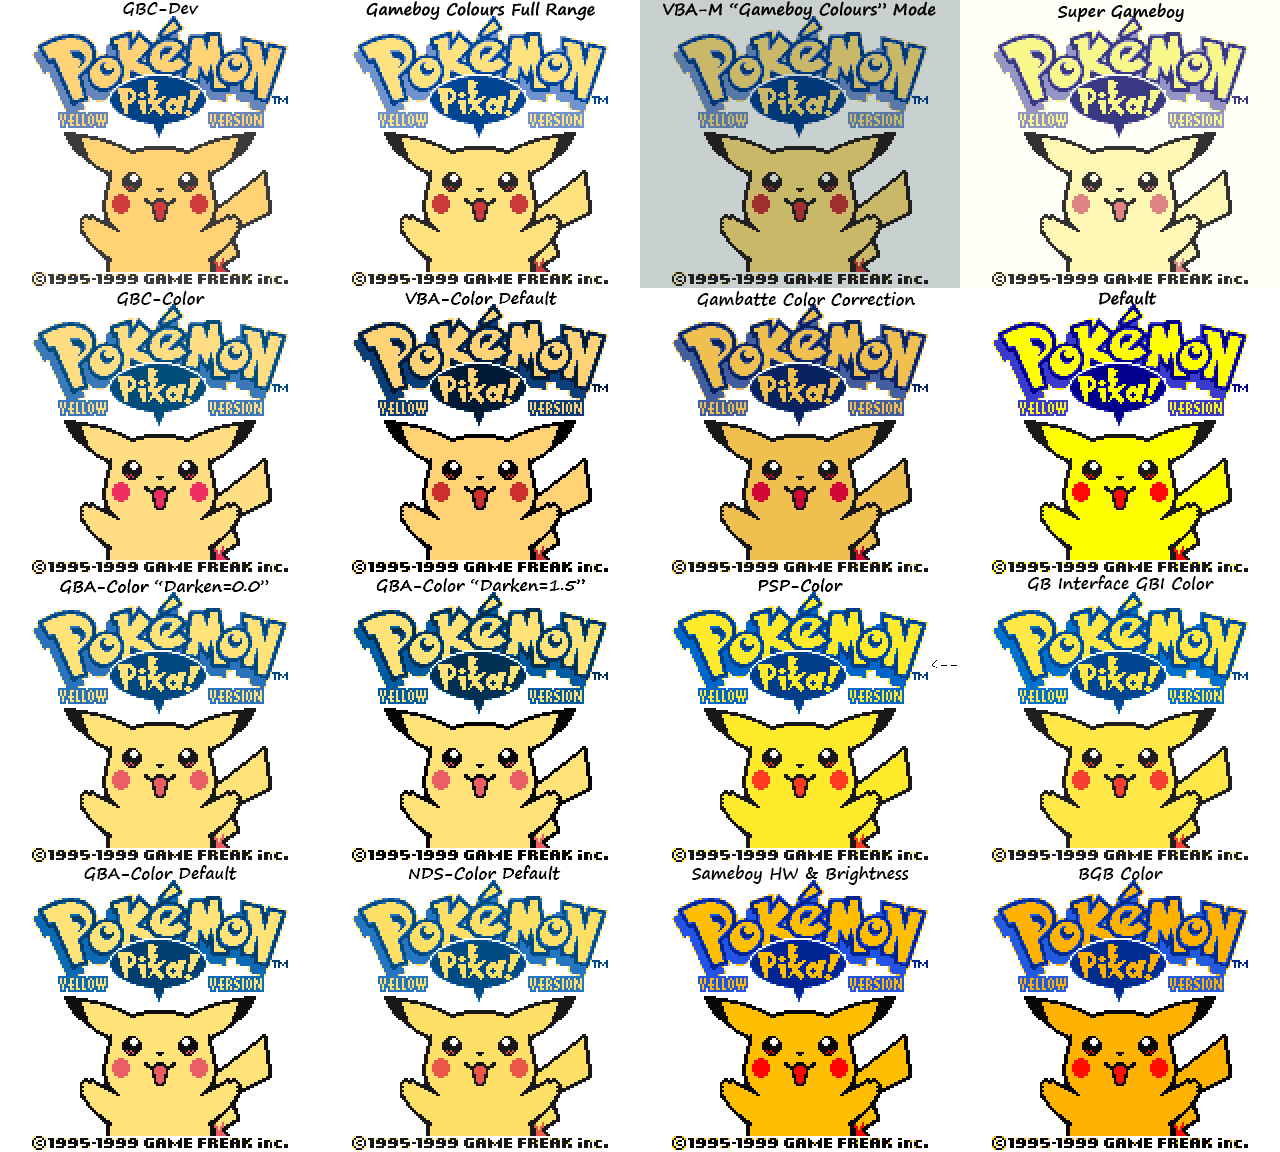 All the comparisons of most software color corrections for the GBC, particuarly, Pokemon Yellow title screen. On the hardware, Pikachu is not pure yellow like you see in Default Raw form. GBC-Dev This...